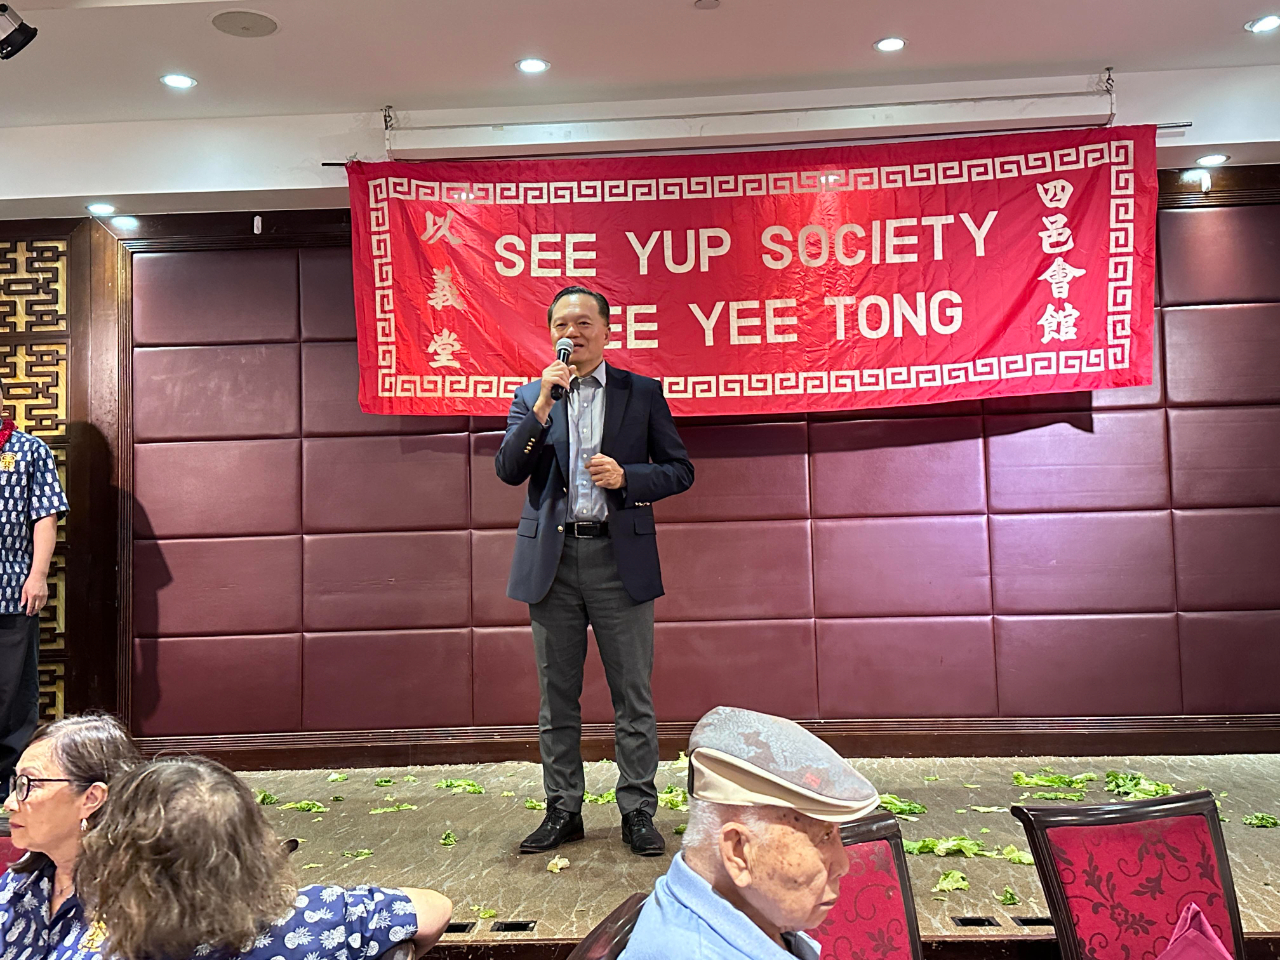 Director General Richard Lin delivers remarks at the banquet hosted by See Yup Benevolent Society and Yee Yee Tong on June 11, 2023.